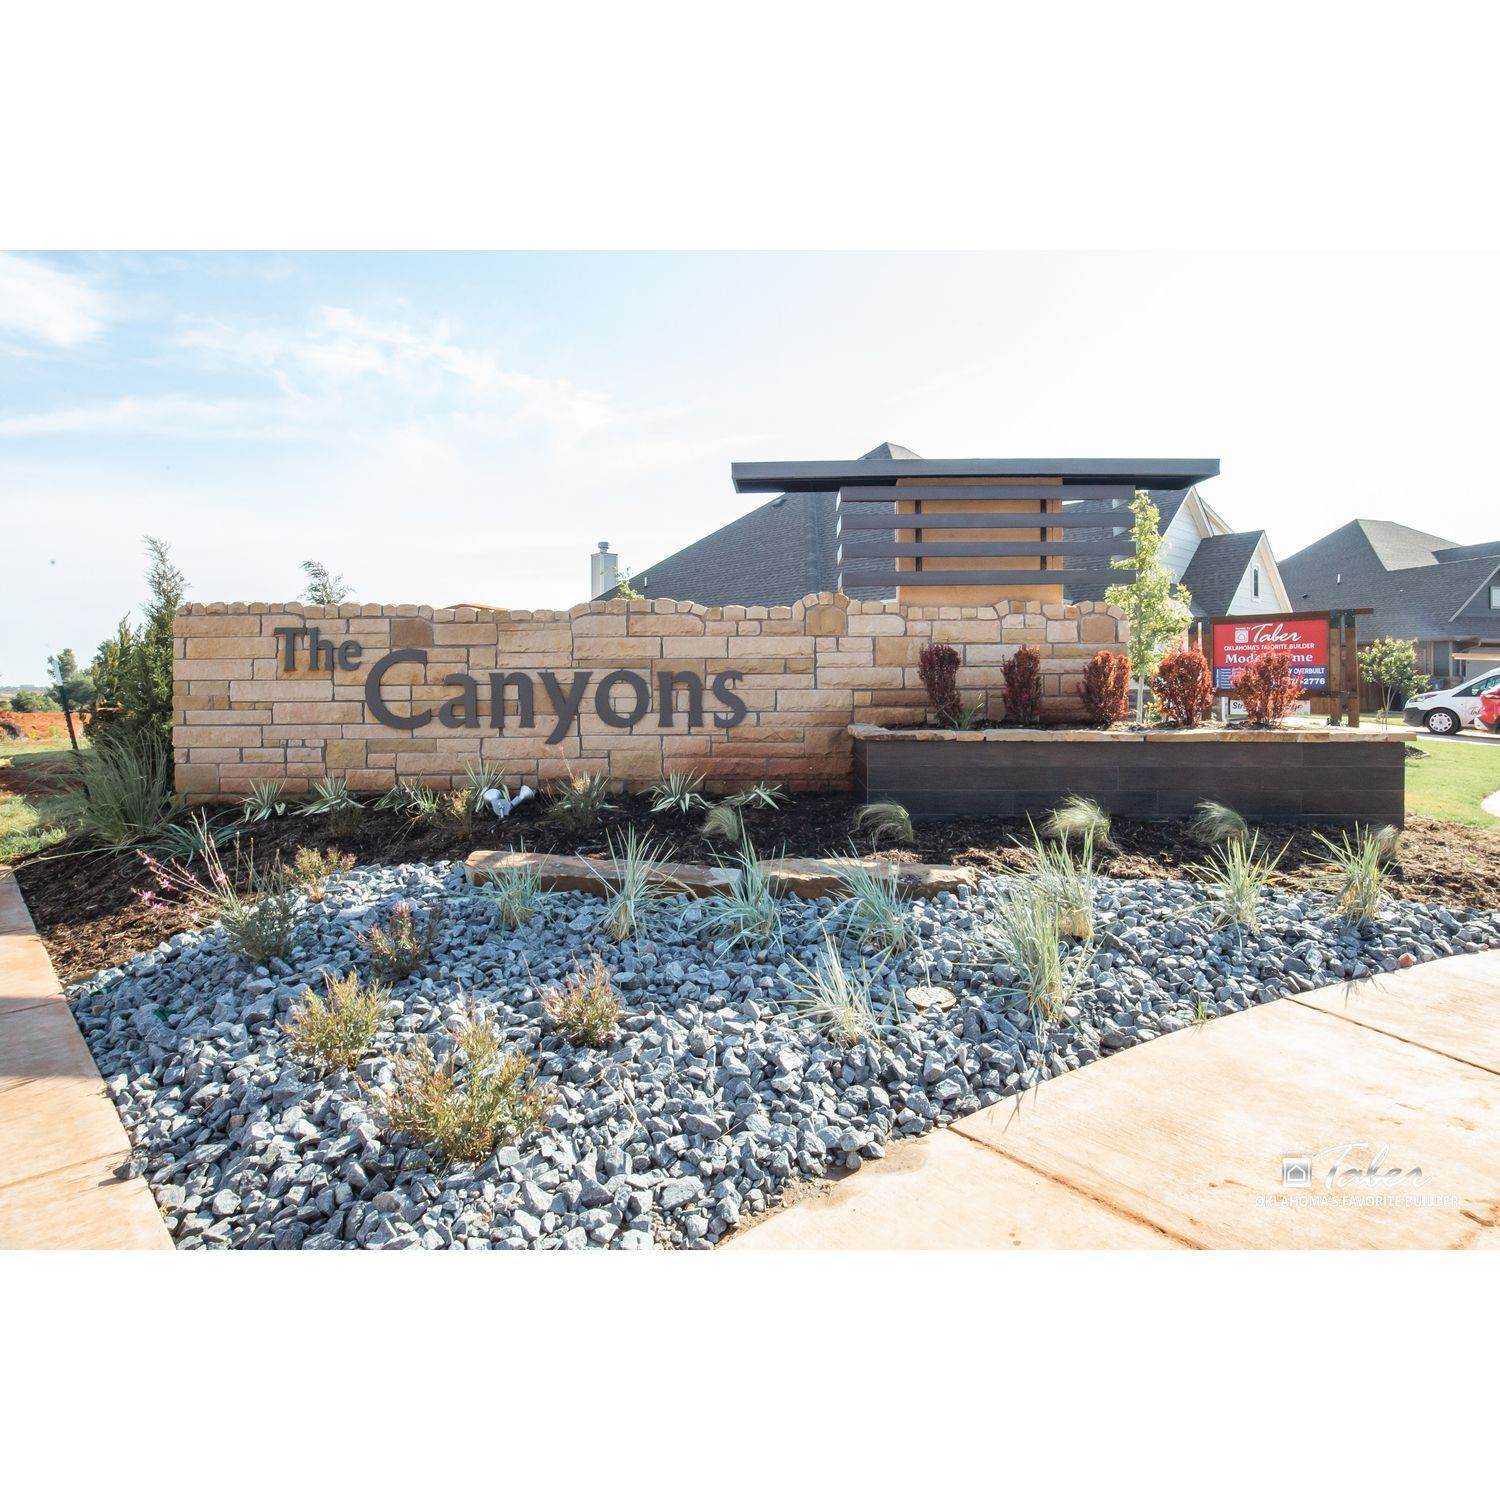 49. Canyons gebouw op 10533 SW 52nd St, Mustang, OK 73064